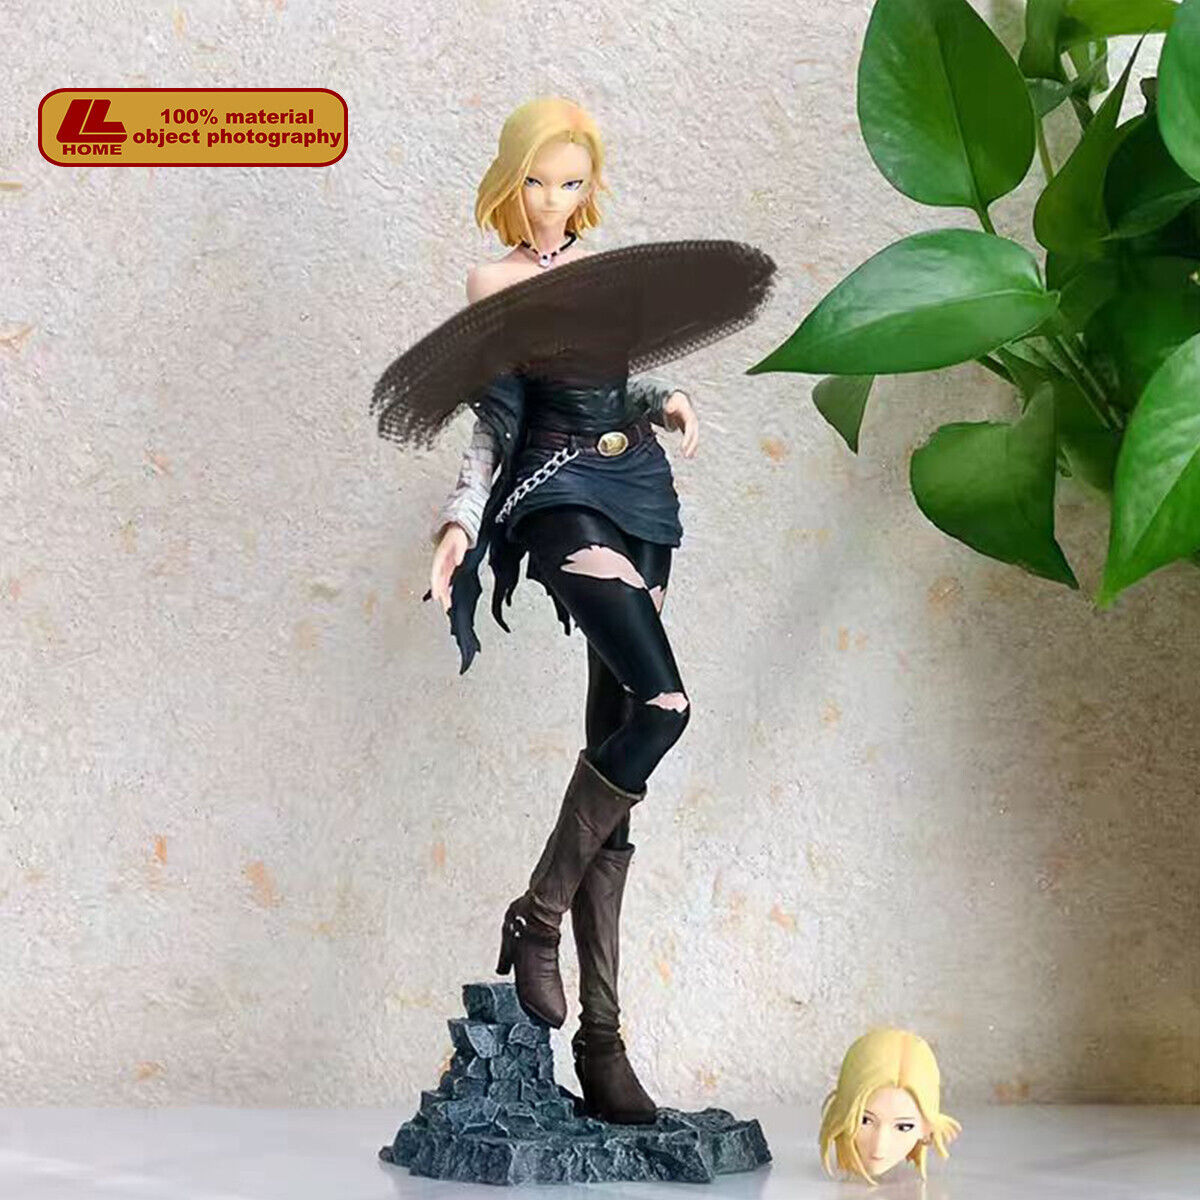 Anime Dragon Ball Z Android 18 Fashion Hot Girl 2 heads Figure Statue Toy Gift